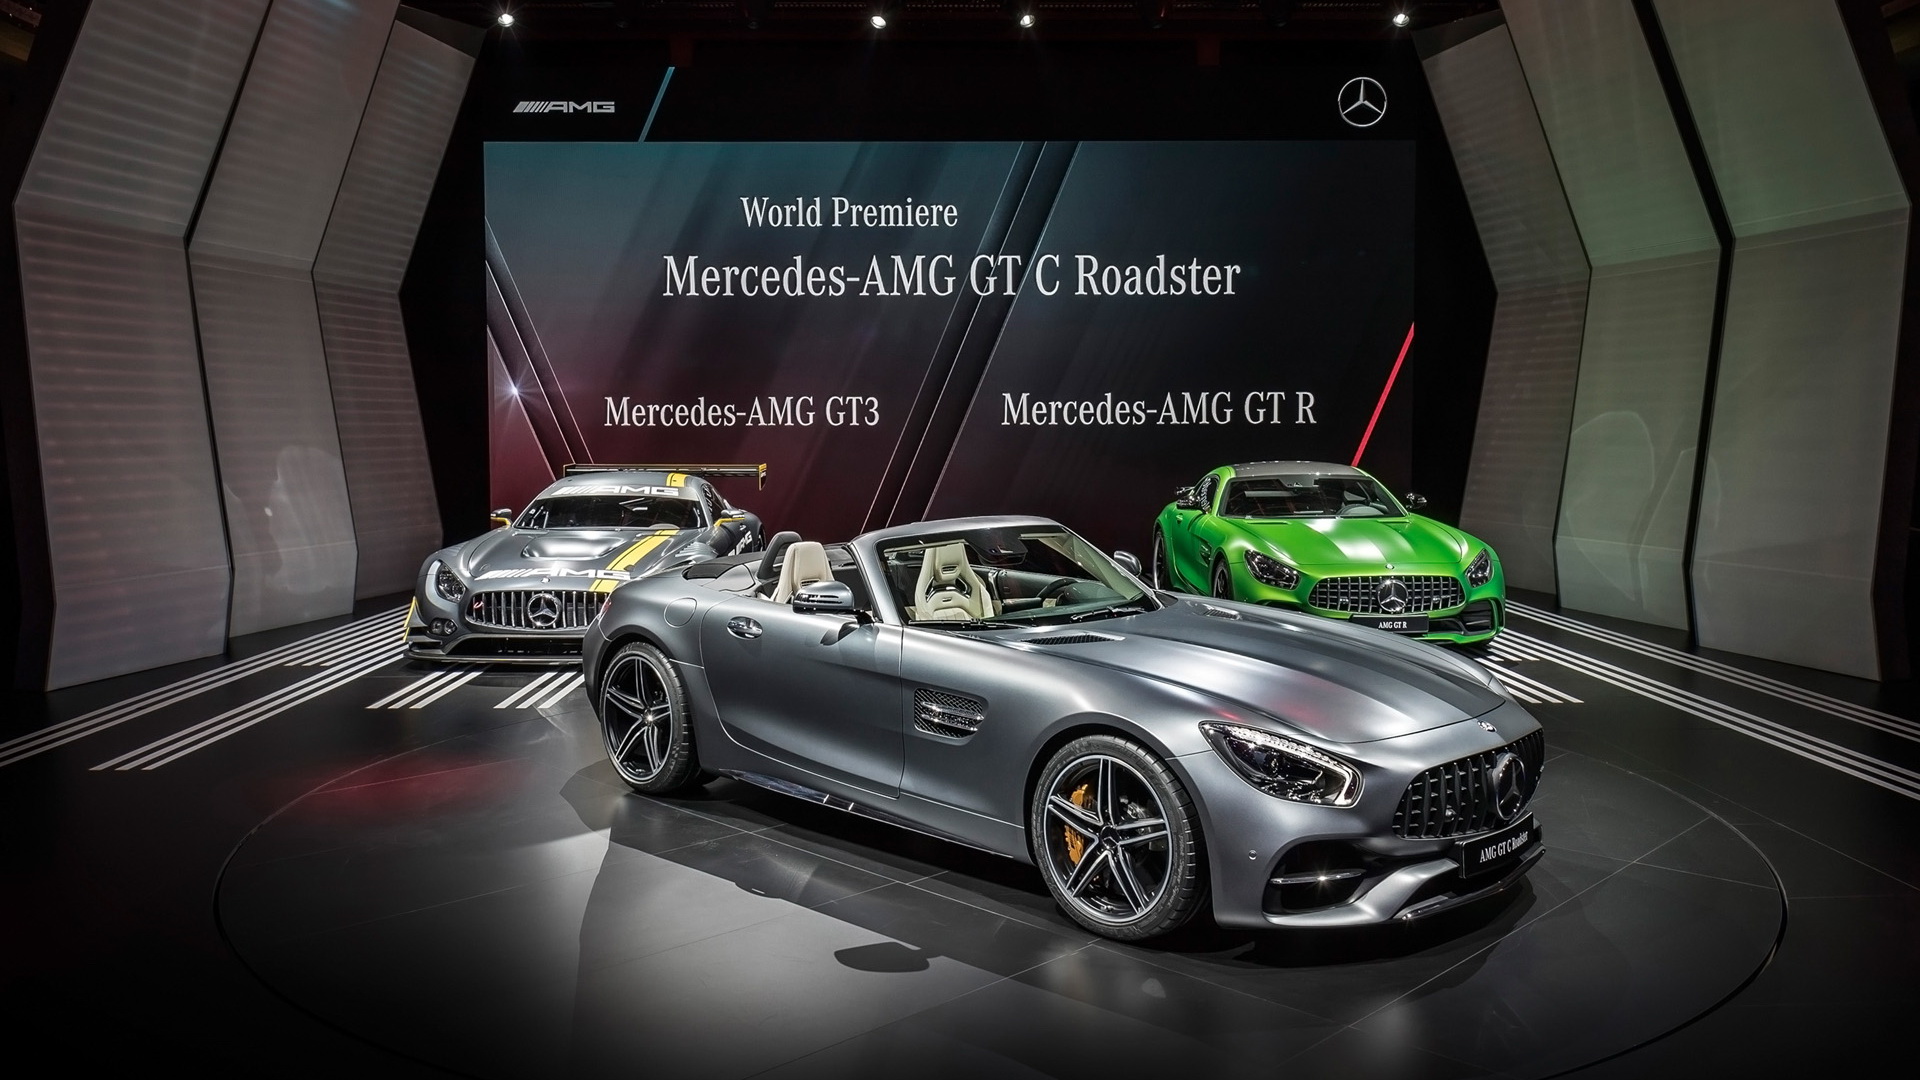 2017 Mercedes-AMG GT and GT C Roadstersܳ(ֽ21)